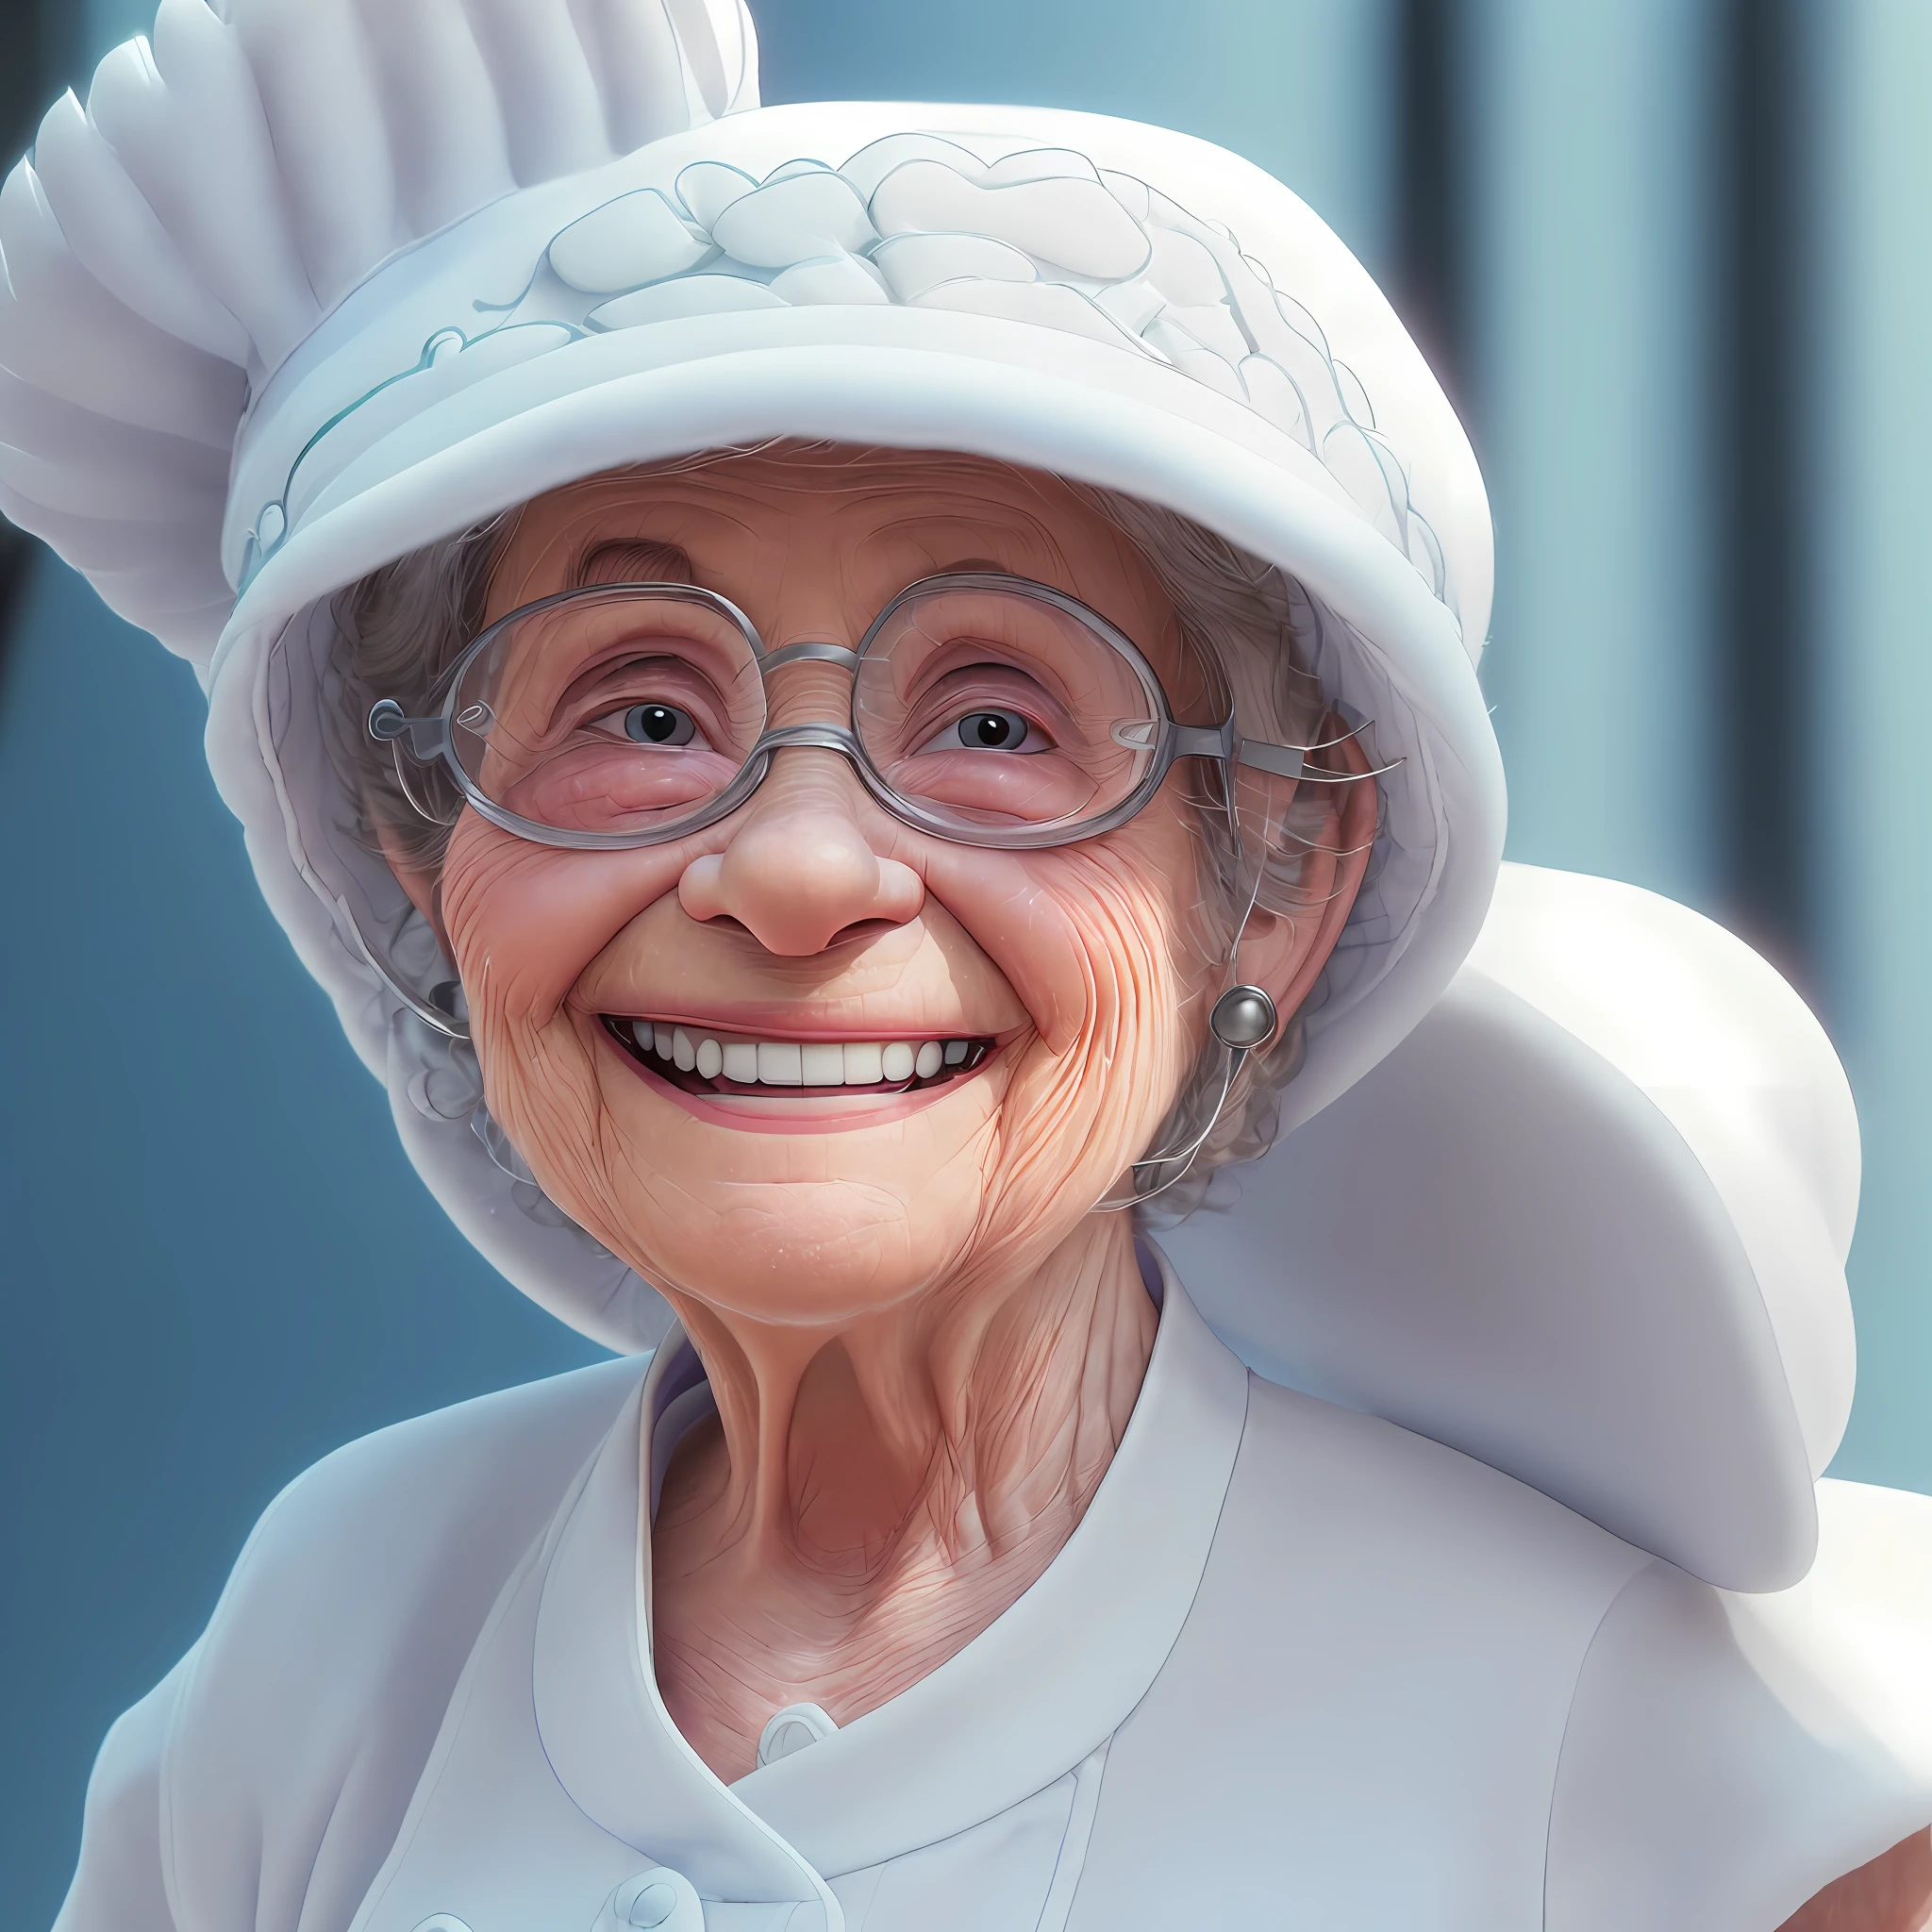 ((best quality)) (detailed) (high resolution and sharpness:1.4) (cute granny smiling in white cook outfit and hat:1.8), (latin:1.5), (chef outfit and hat:1.4), (close-up:1.4), (centered:1.5), (against dark background:1.3), (looking into camera lens:1.4), (bright eyes:1.3), (window lighting:1.4), (lighting studio perfect:1.3), (sharp focus:1.4), (high resolution photography:1.2), ultra detailed, highly detailed, (high definition:1.2), (perfect composition:1.2), intricate, (cute and beautiful:1.3), award-winning photography, professional color grading, octane, unrealistic, vibrant colors, (in pixar style:1.5)